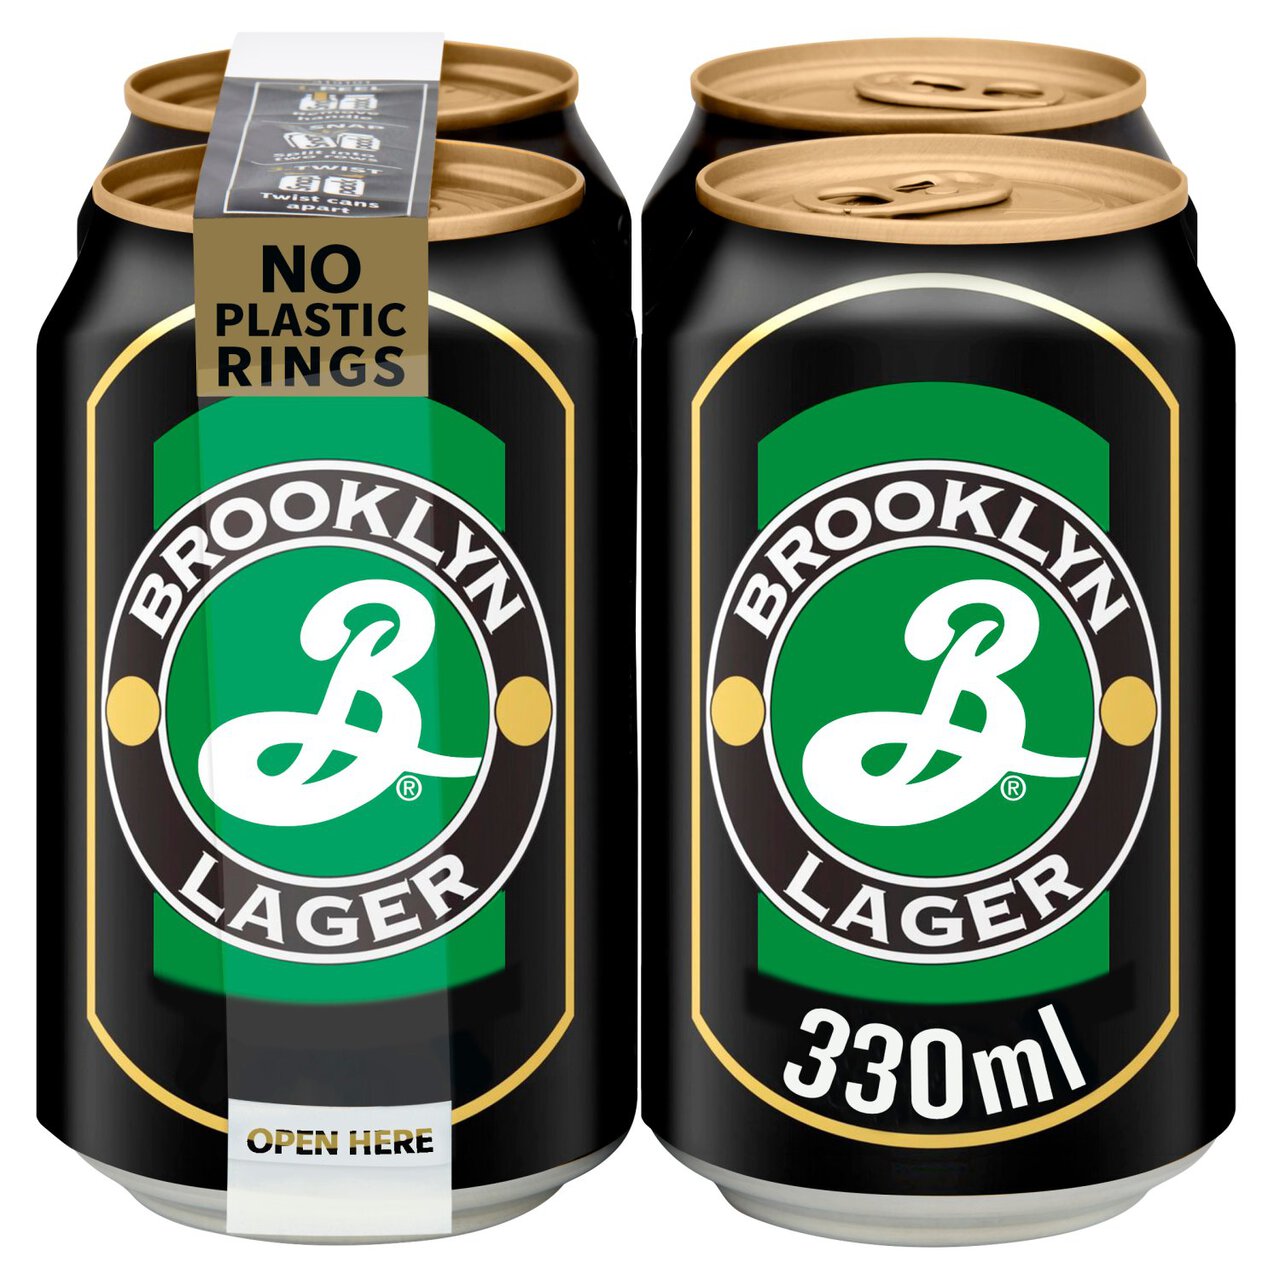 Brooklyn Lager Beer Cans 4 x 330ml